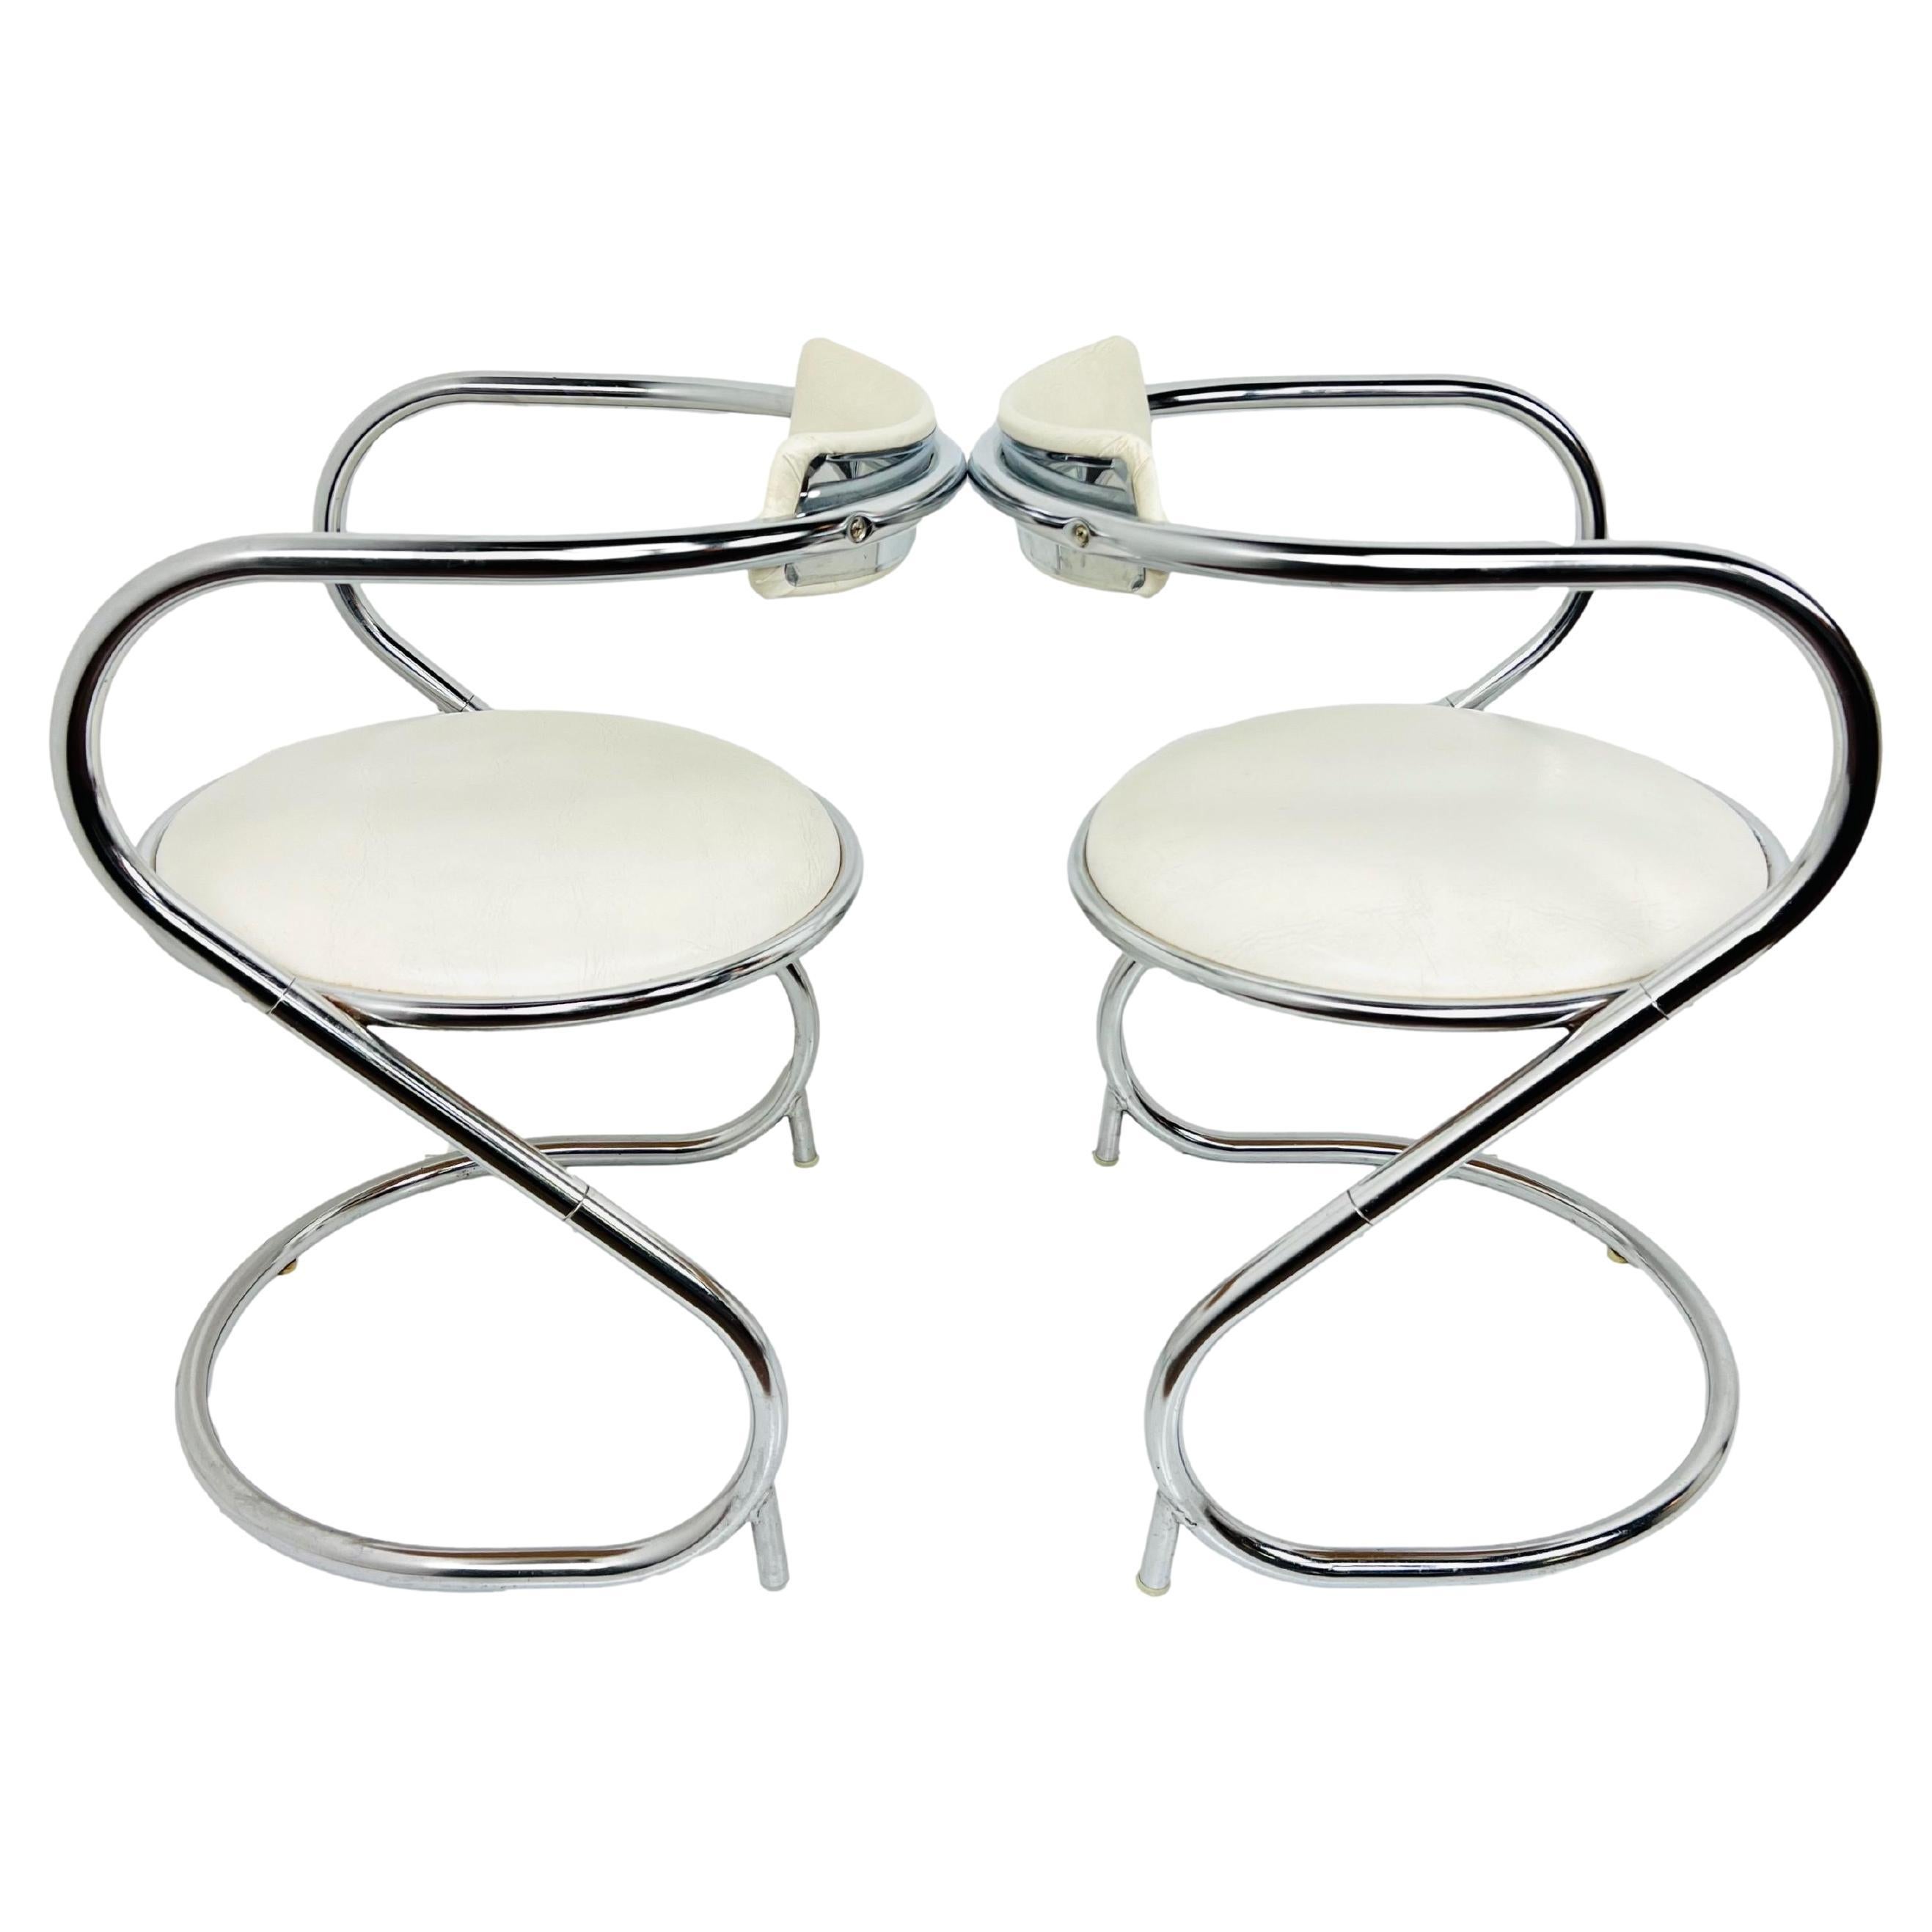 Pair of Midcentury Chrome Cantilever Chairs